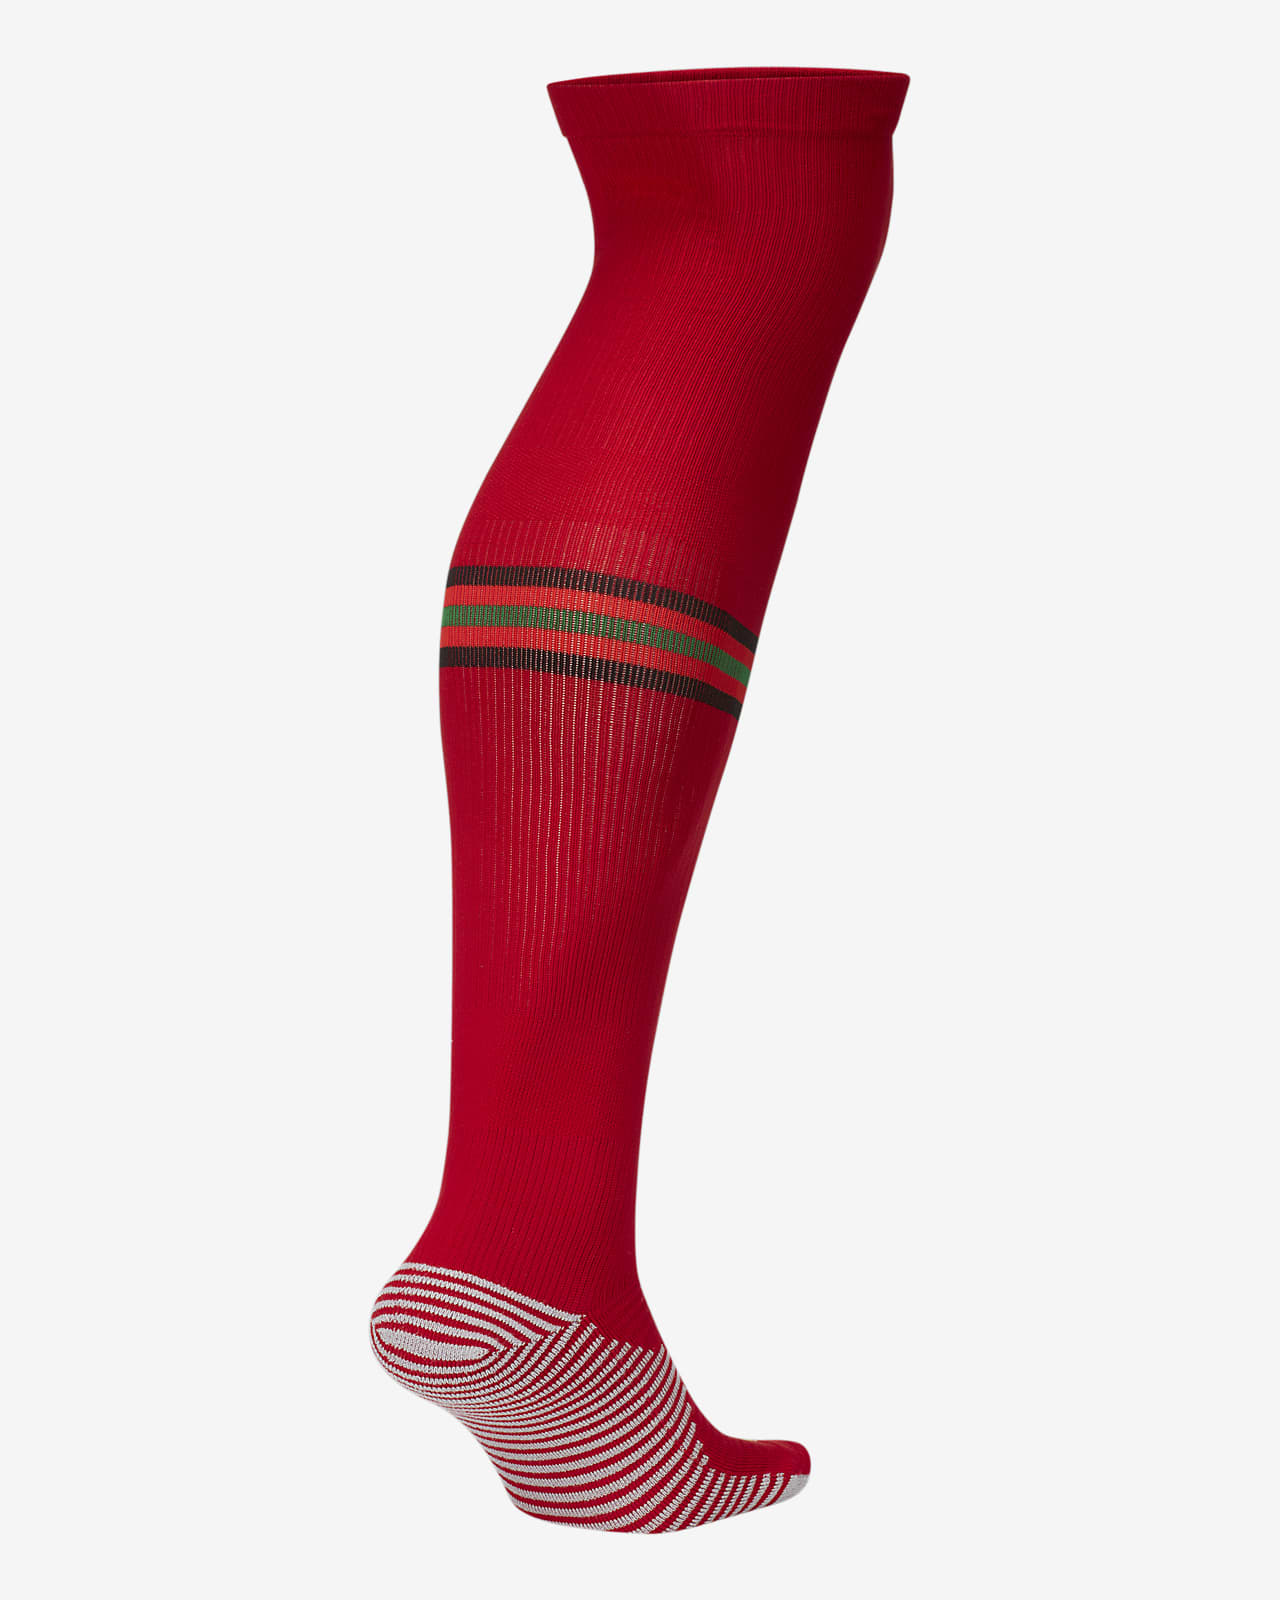 nike football socks without foot